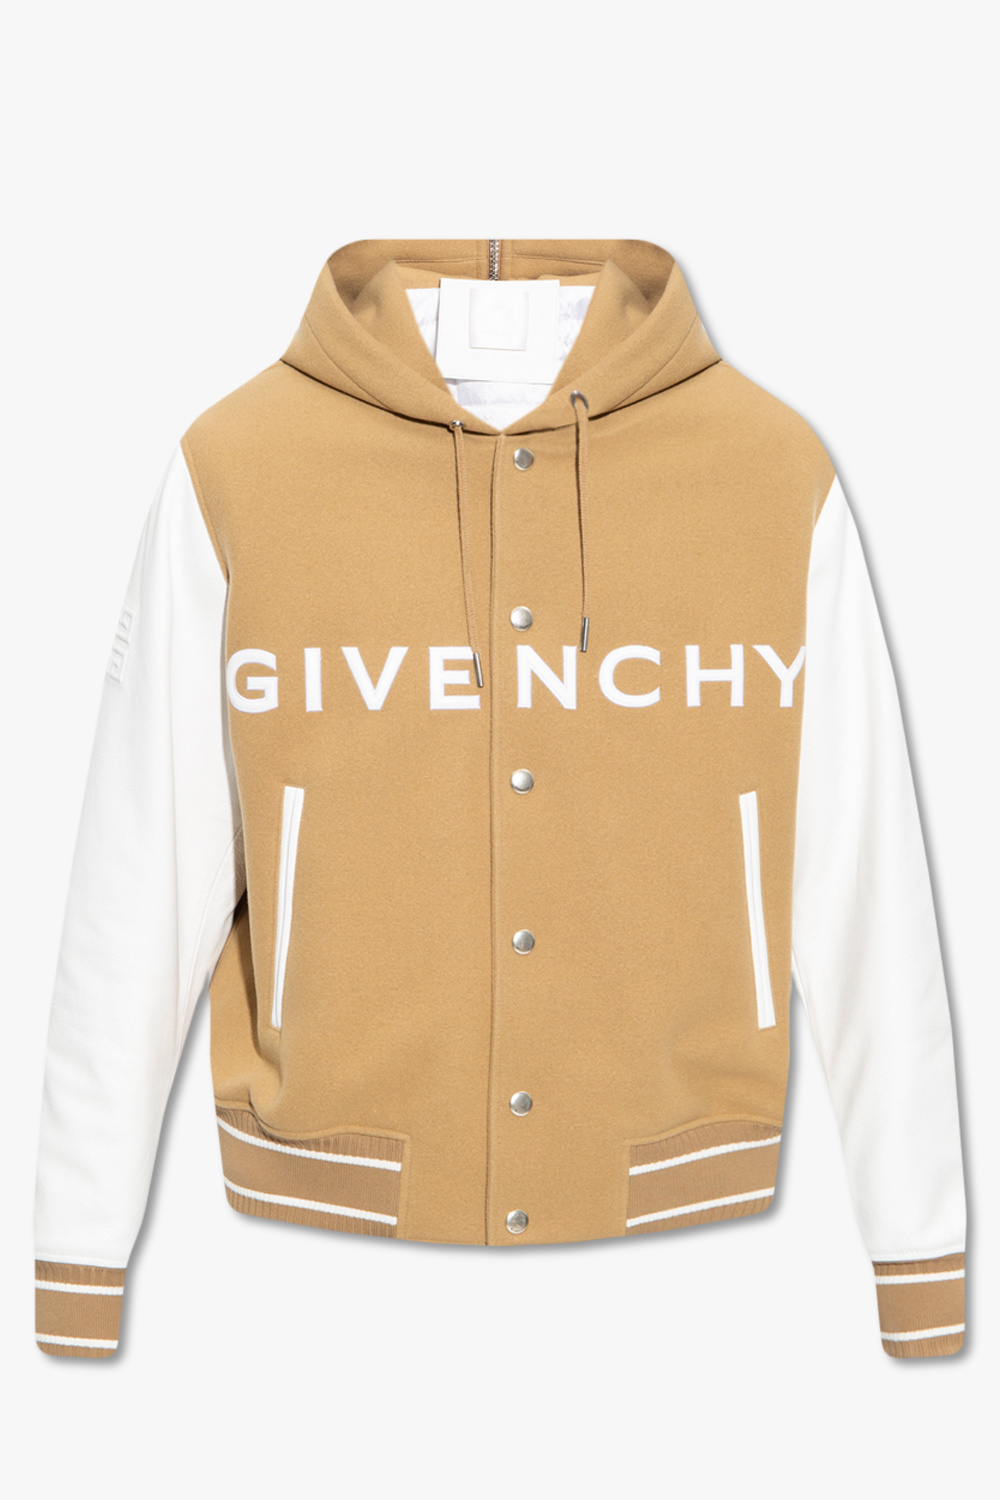 givenchy contrast Jacket with logo